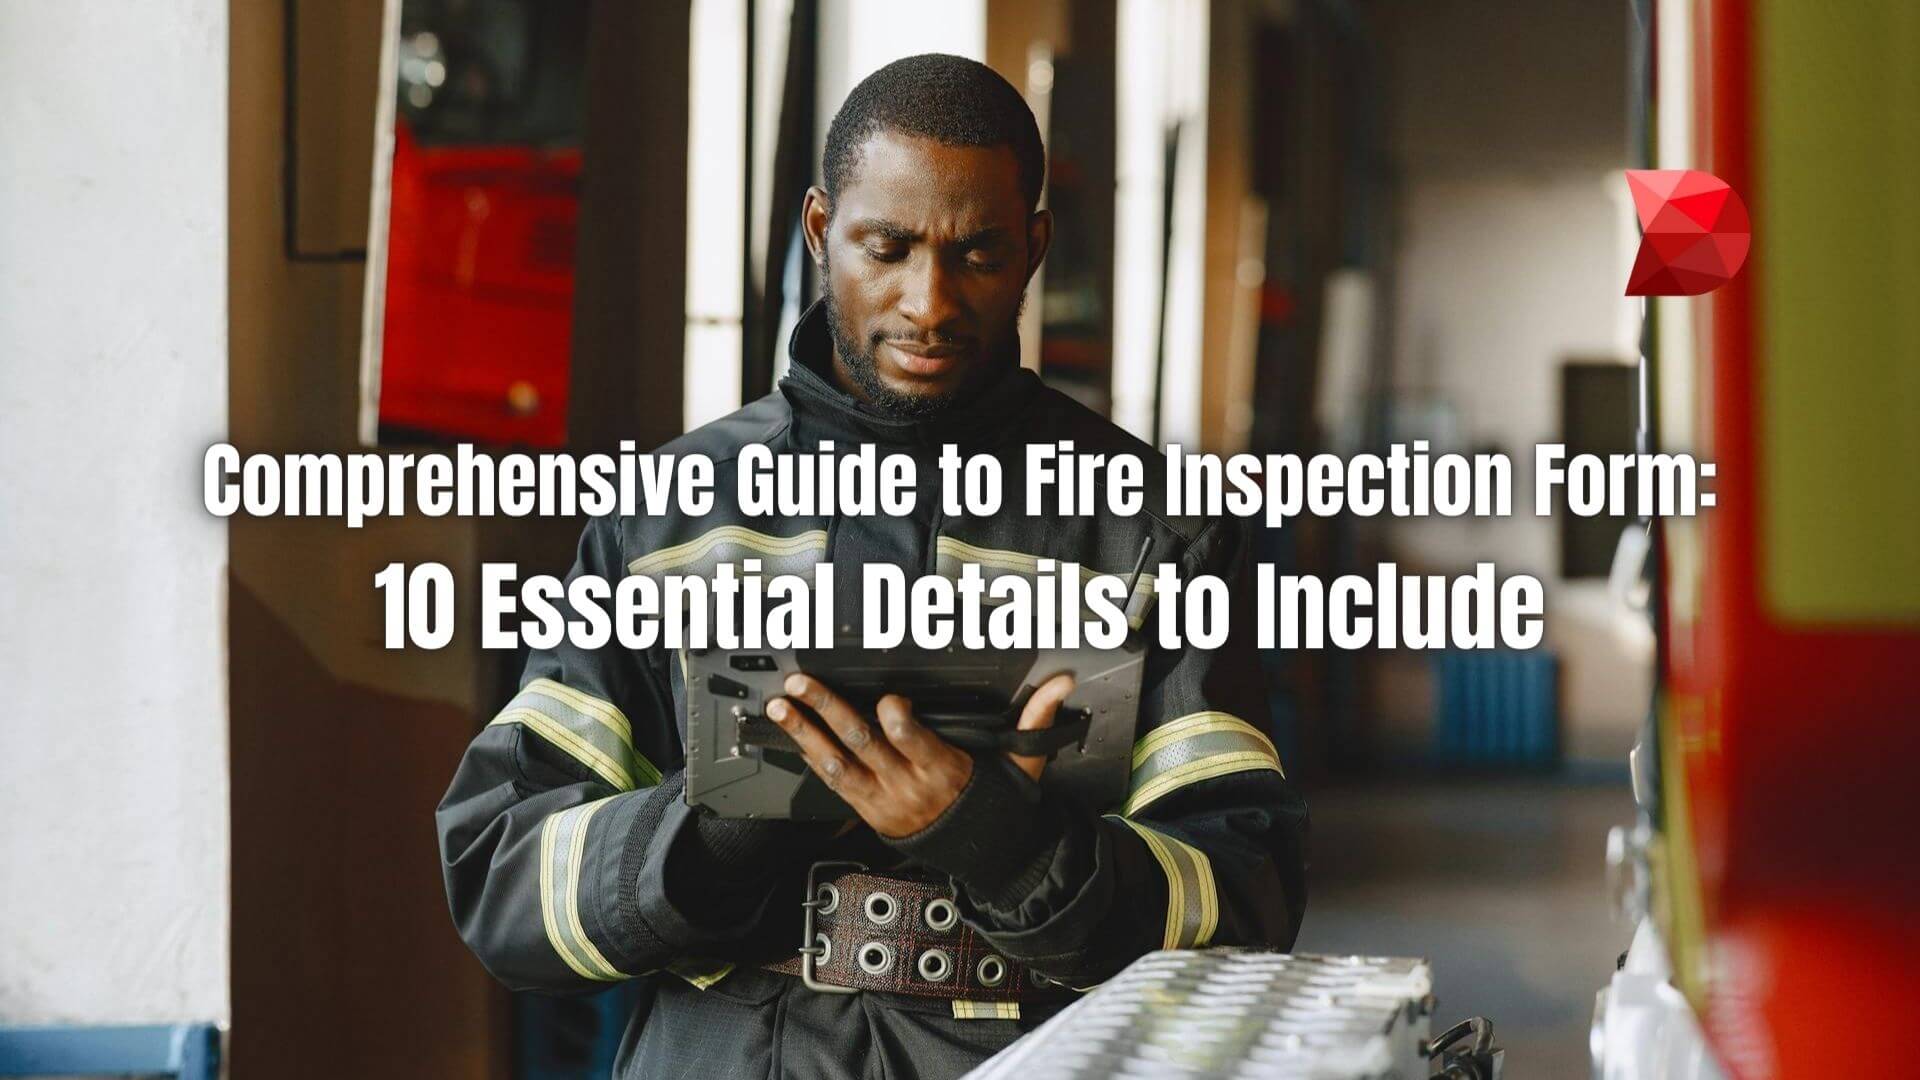 In this article, we're going to show ten details that you need to include in your fire inspection form. Read here to learn more!